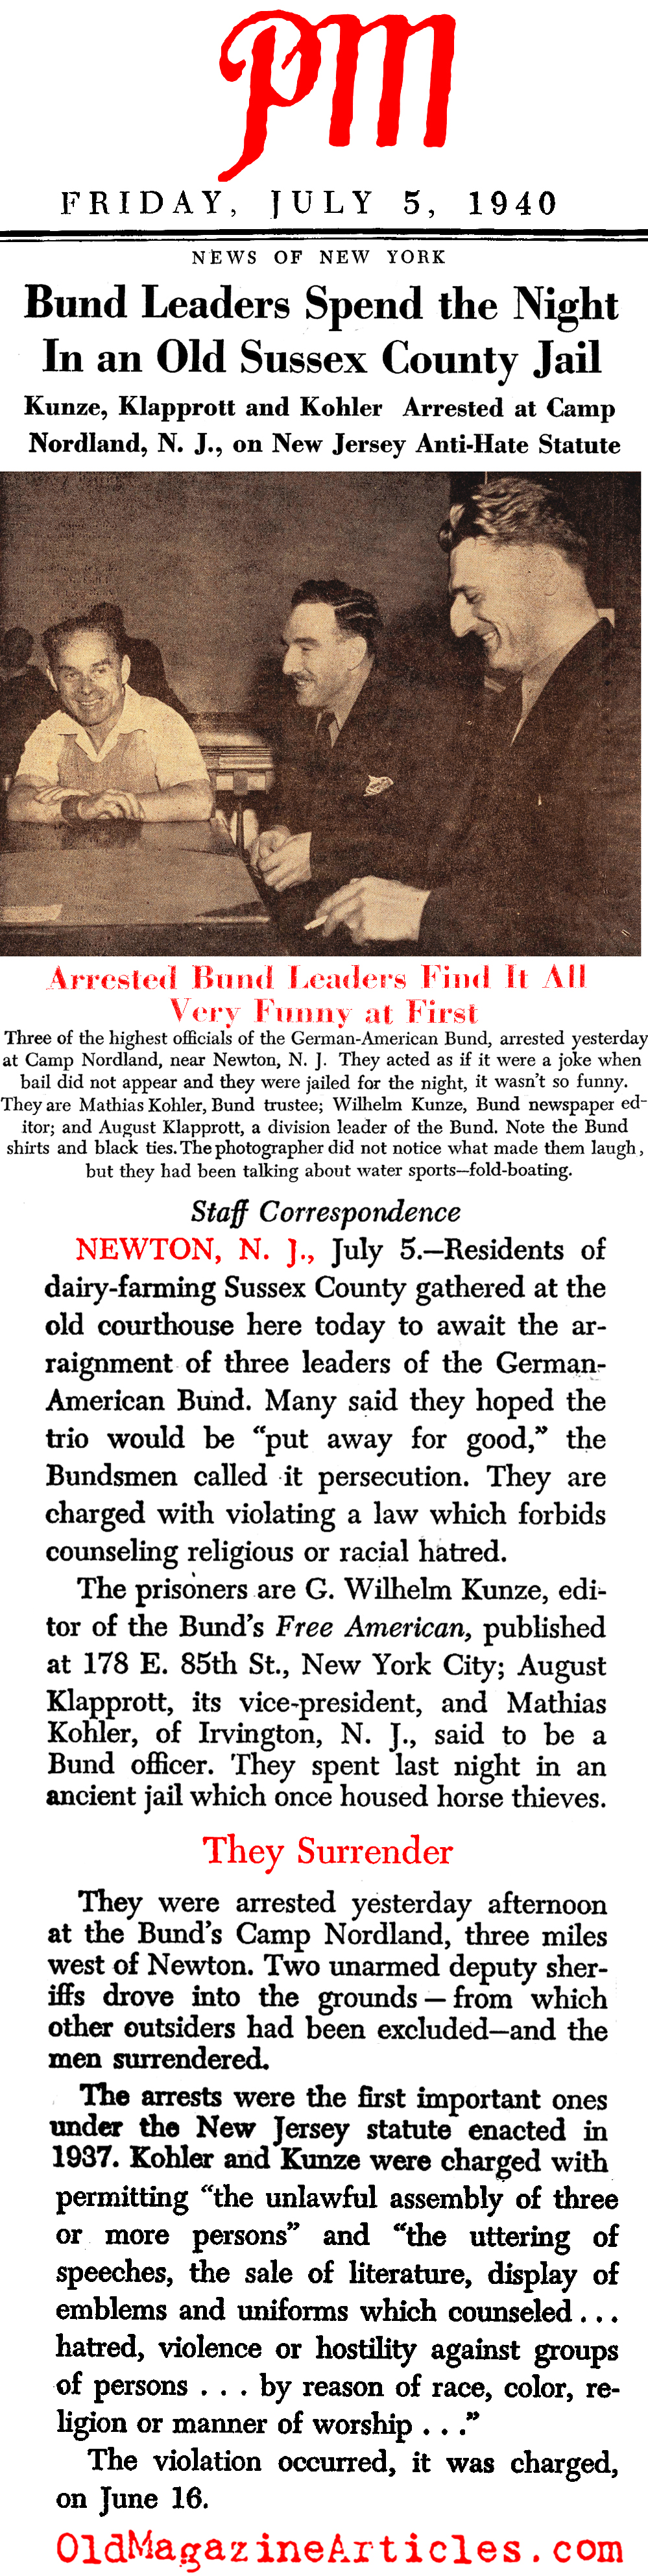 New Jersey Law Nabs Top Bundists (PM Tabloid, 1940)